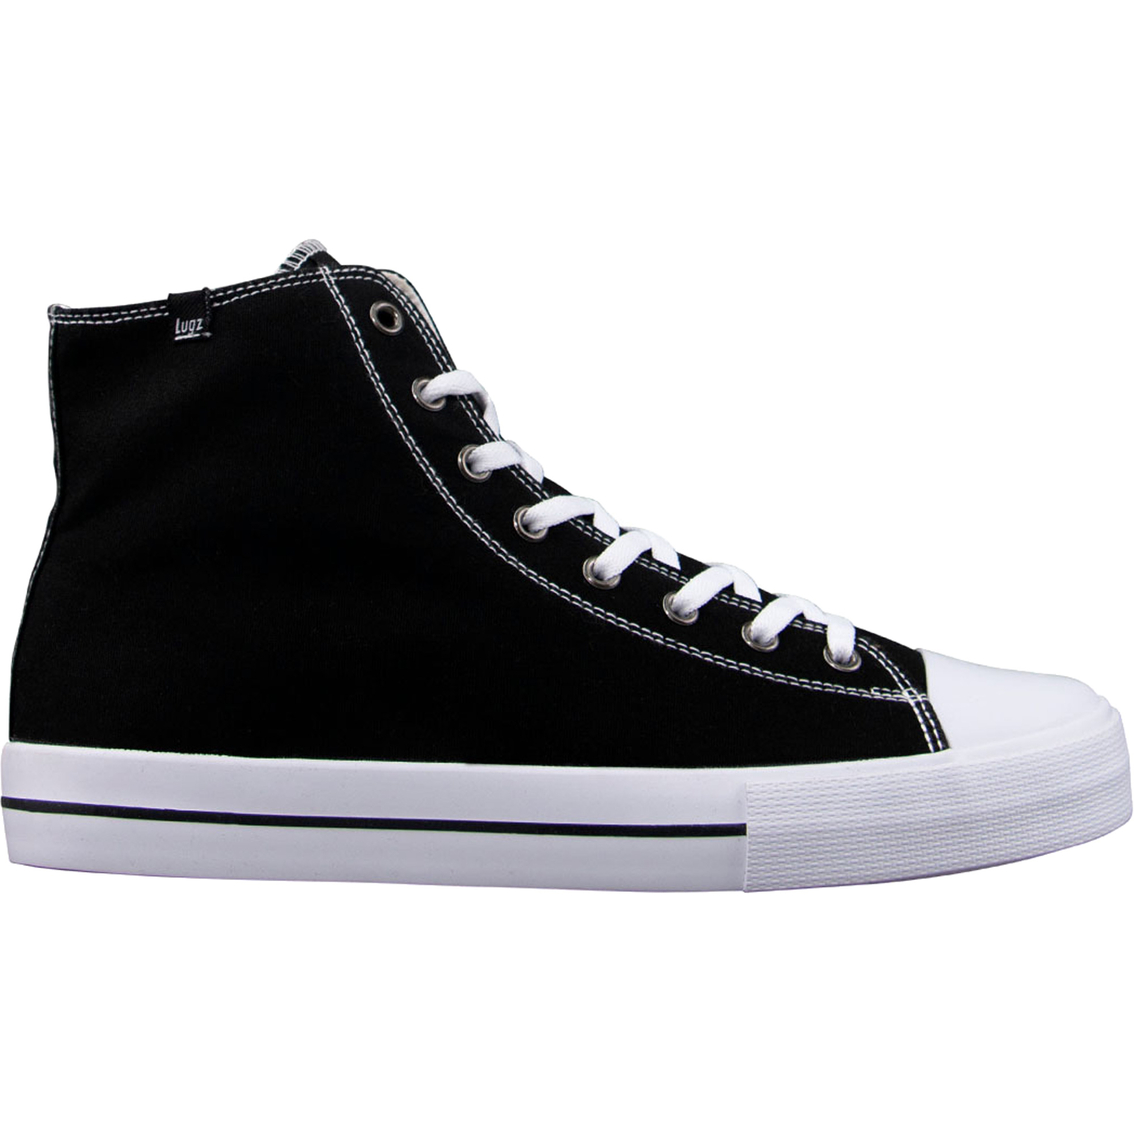 Lugz Men's Stagger Hi Sneakers - Image 2 of 7